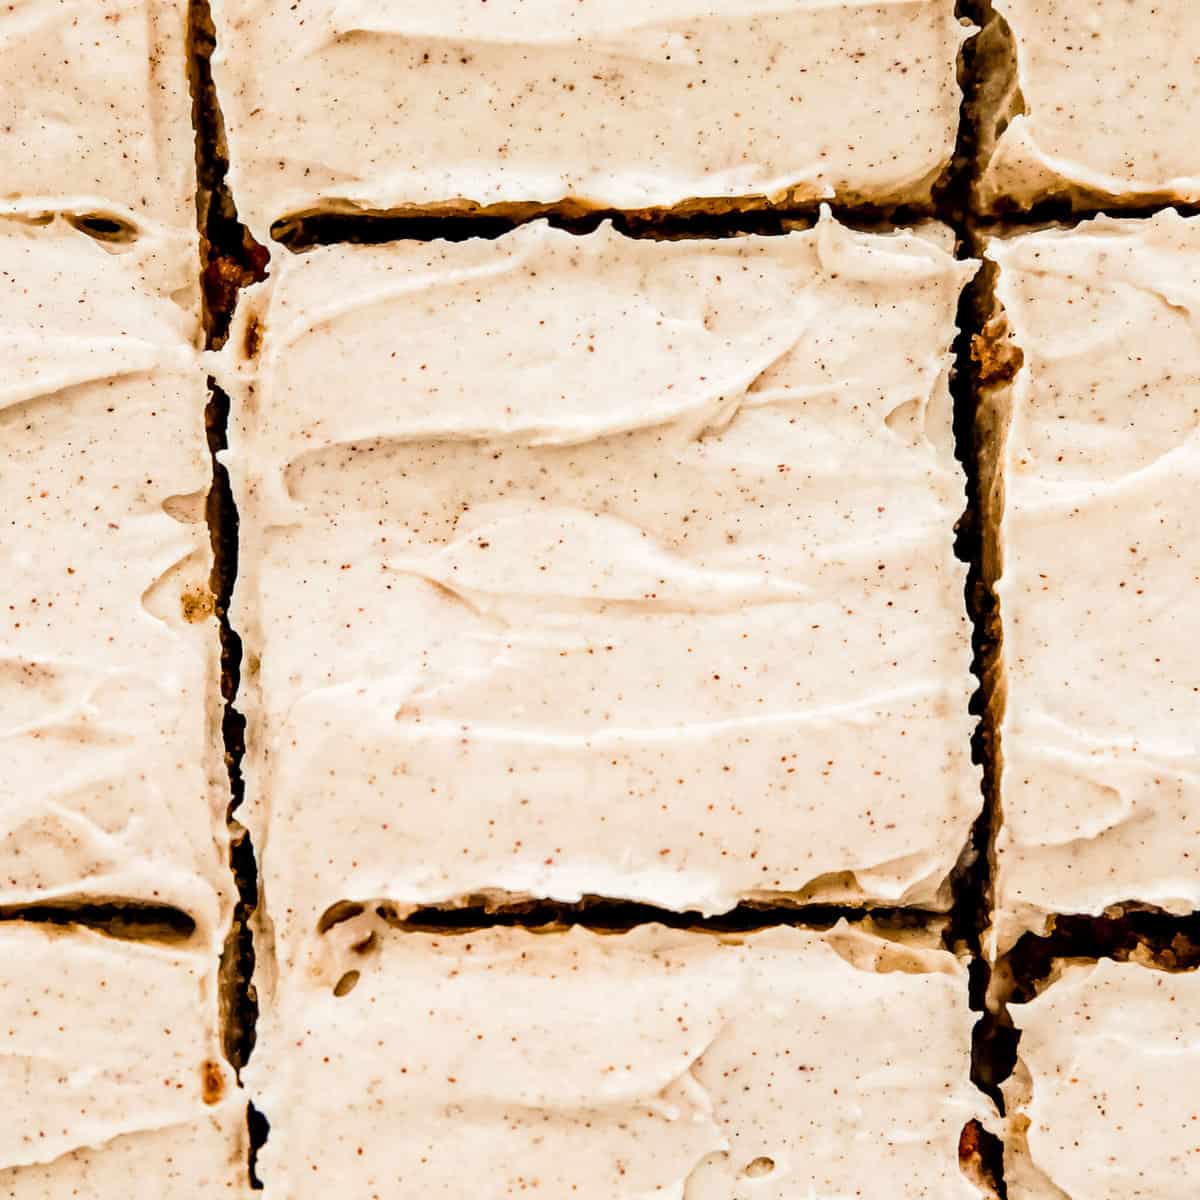 a row of keto carrot cake bars frosted with cinnamon cream cheese frosting